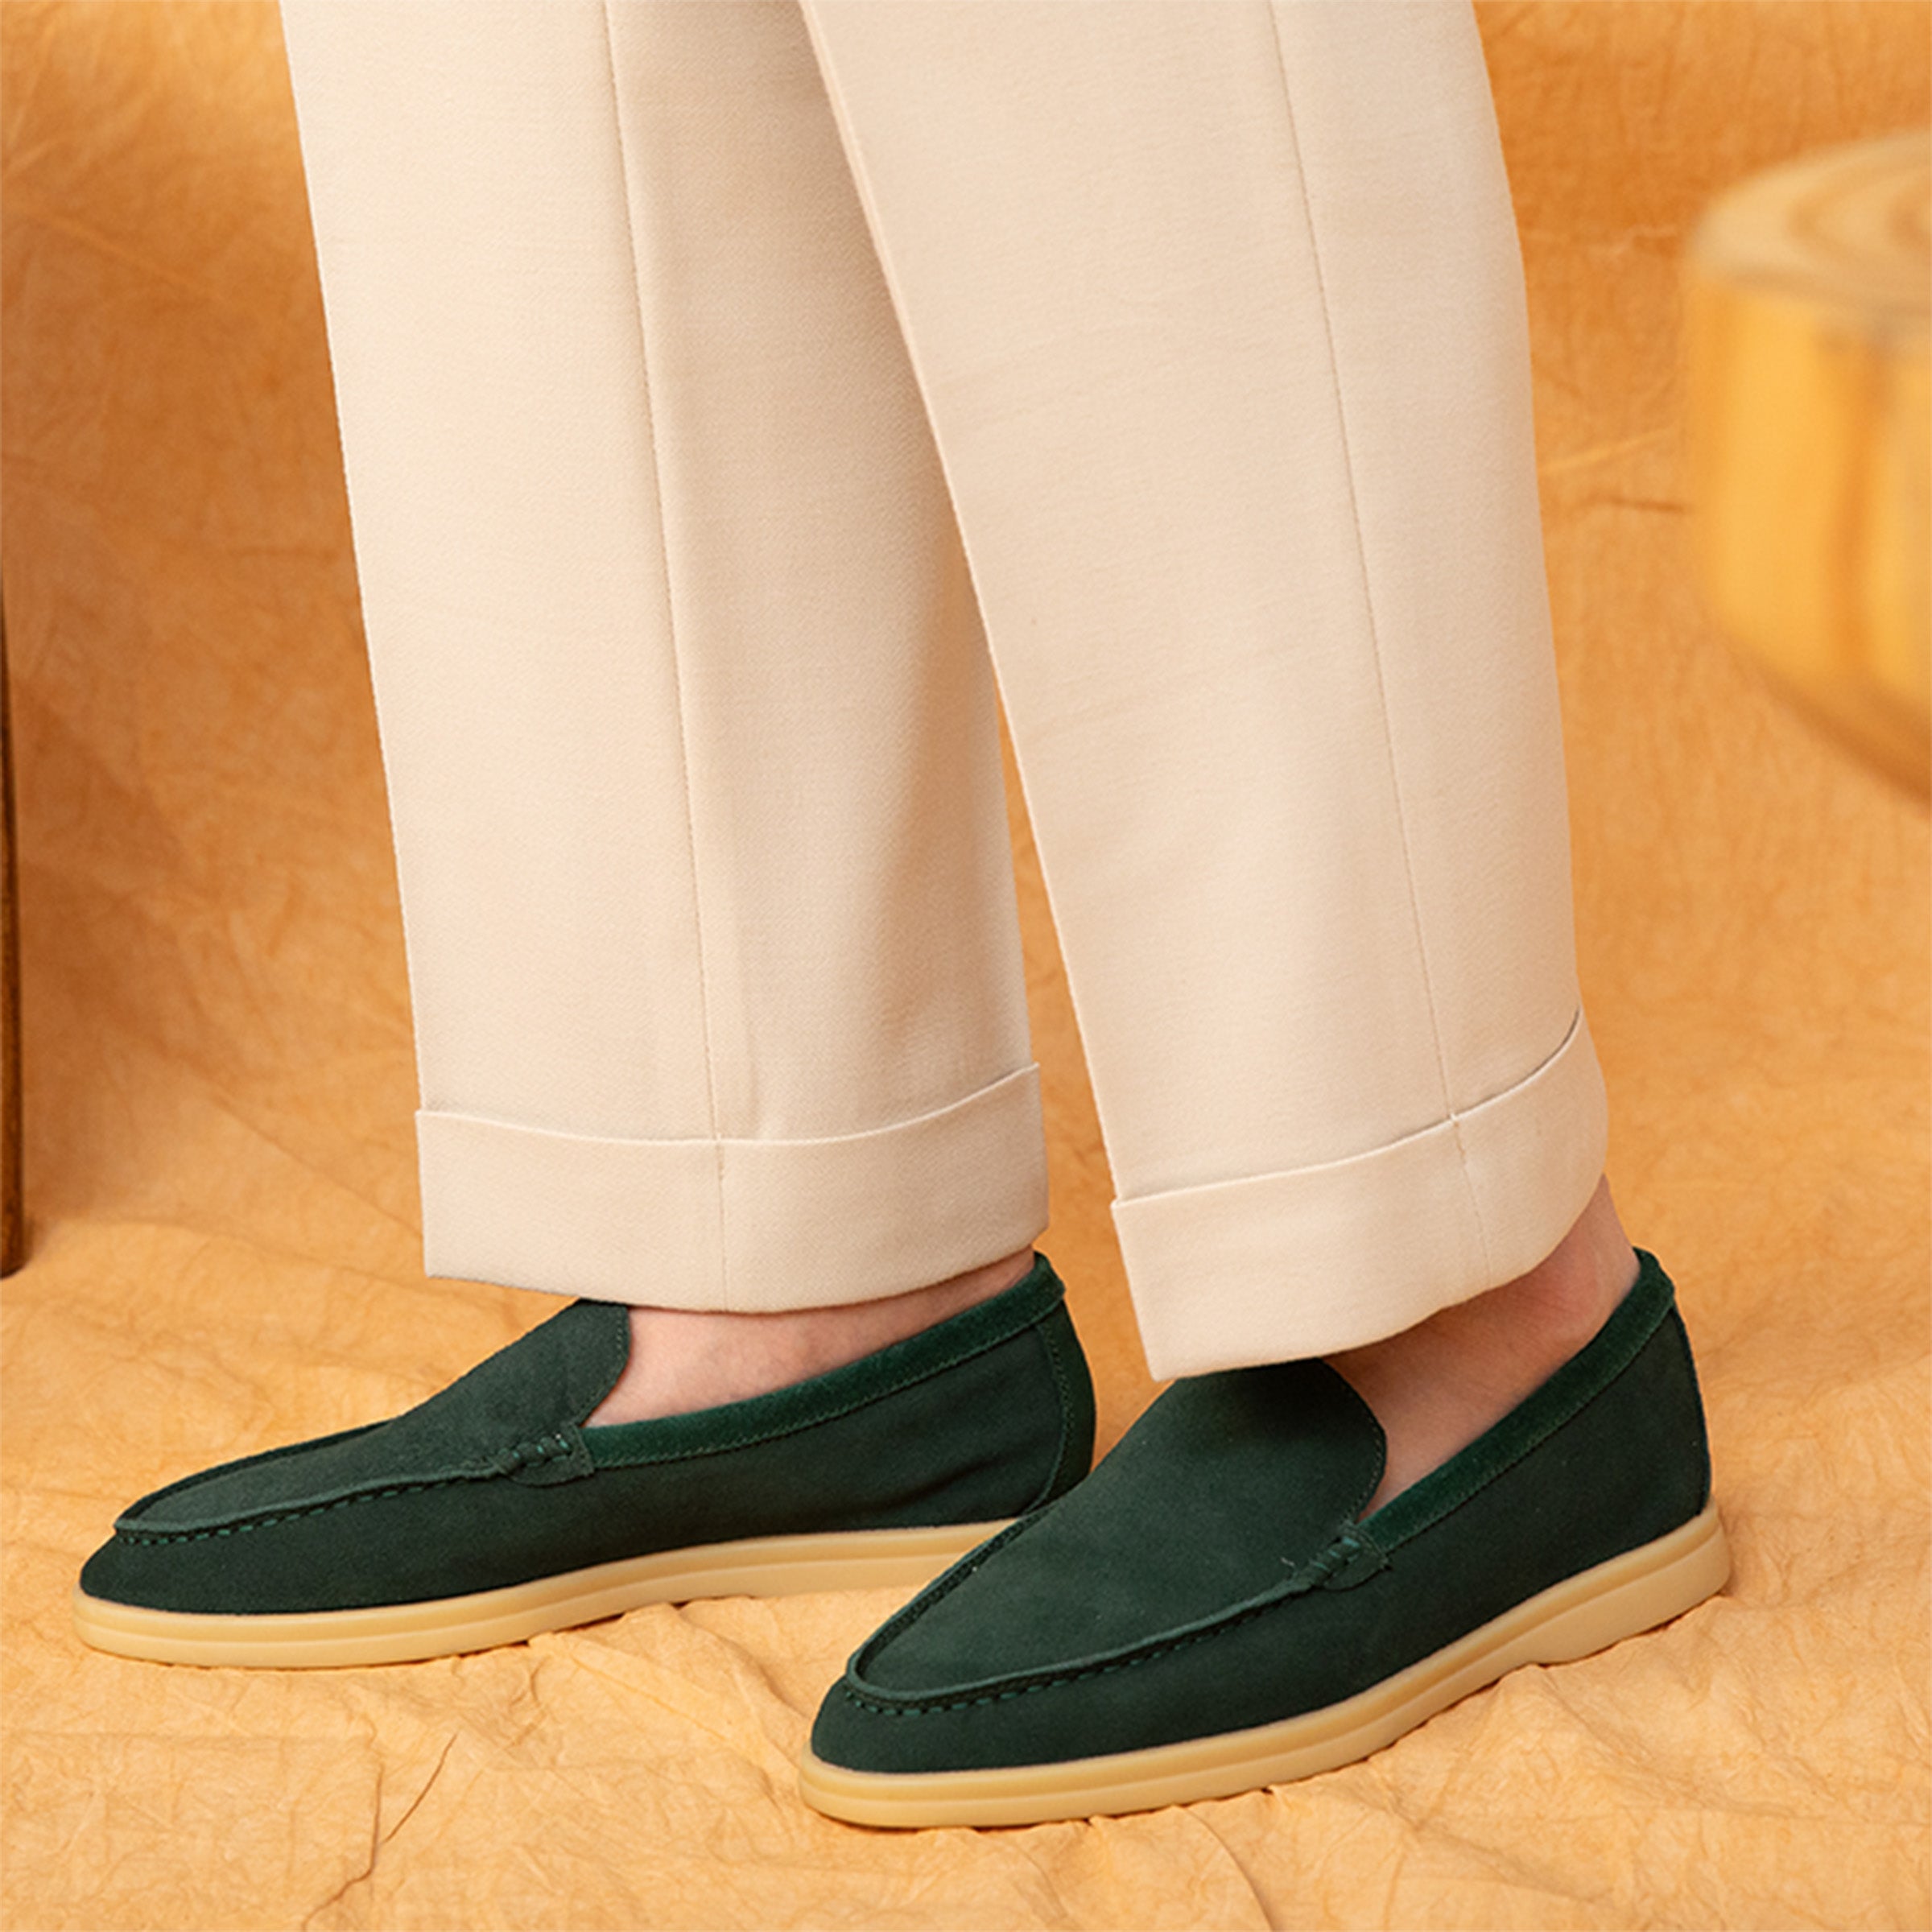 Positano Suede Loafers